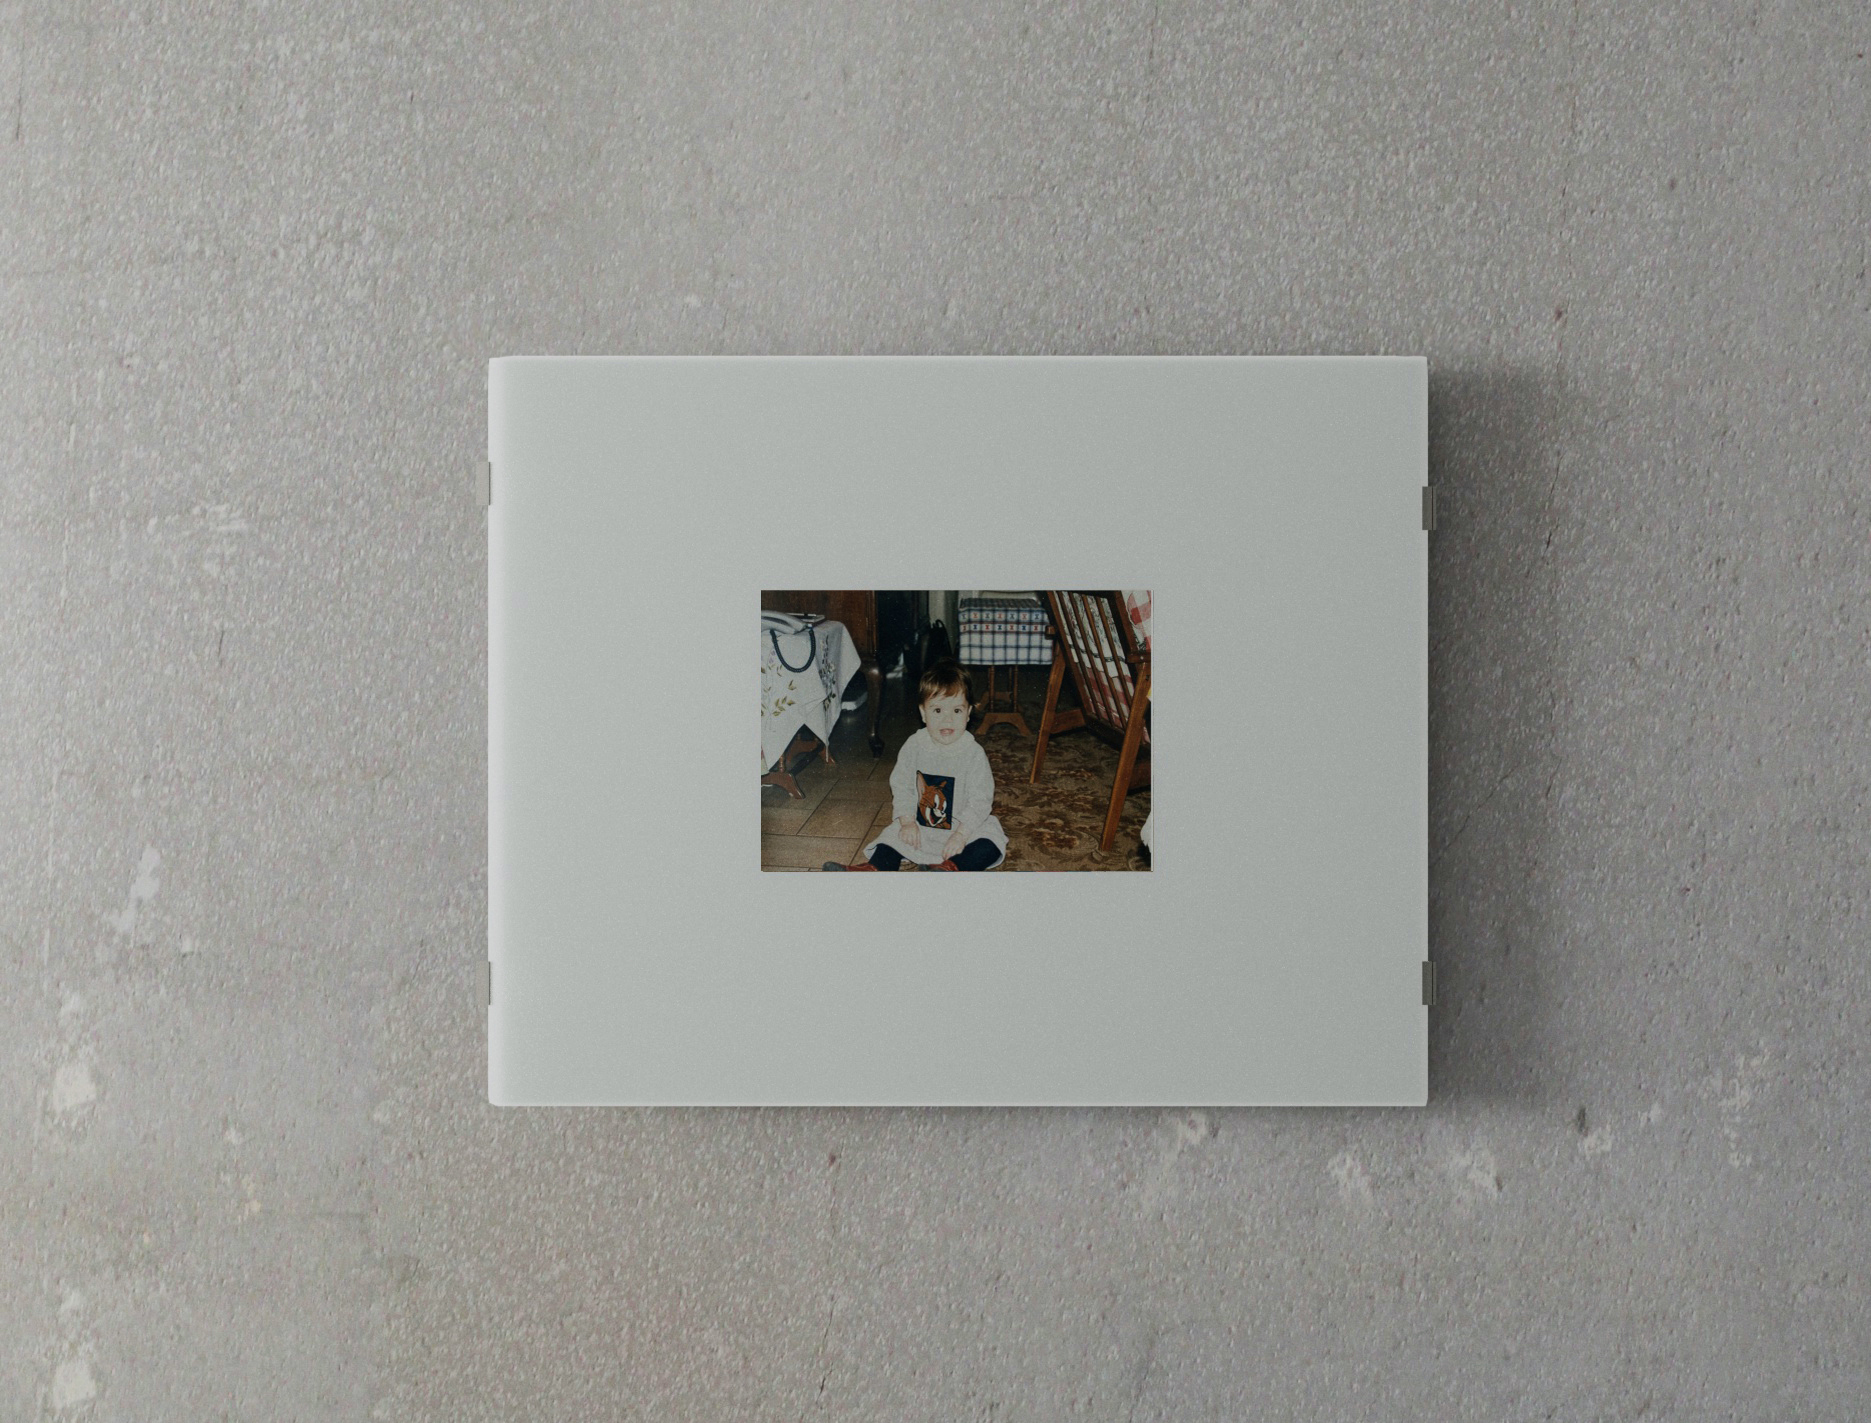 Untitled, 2021, Photograph, clip frame